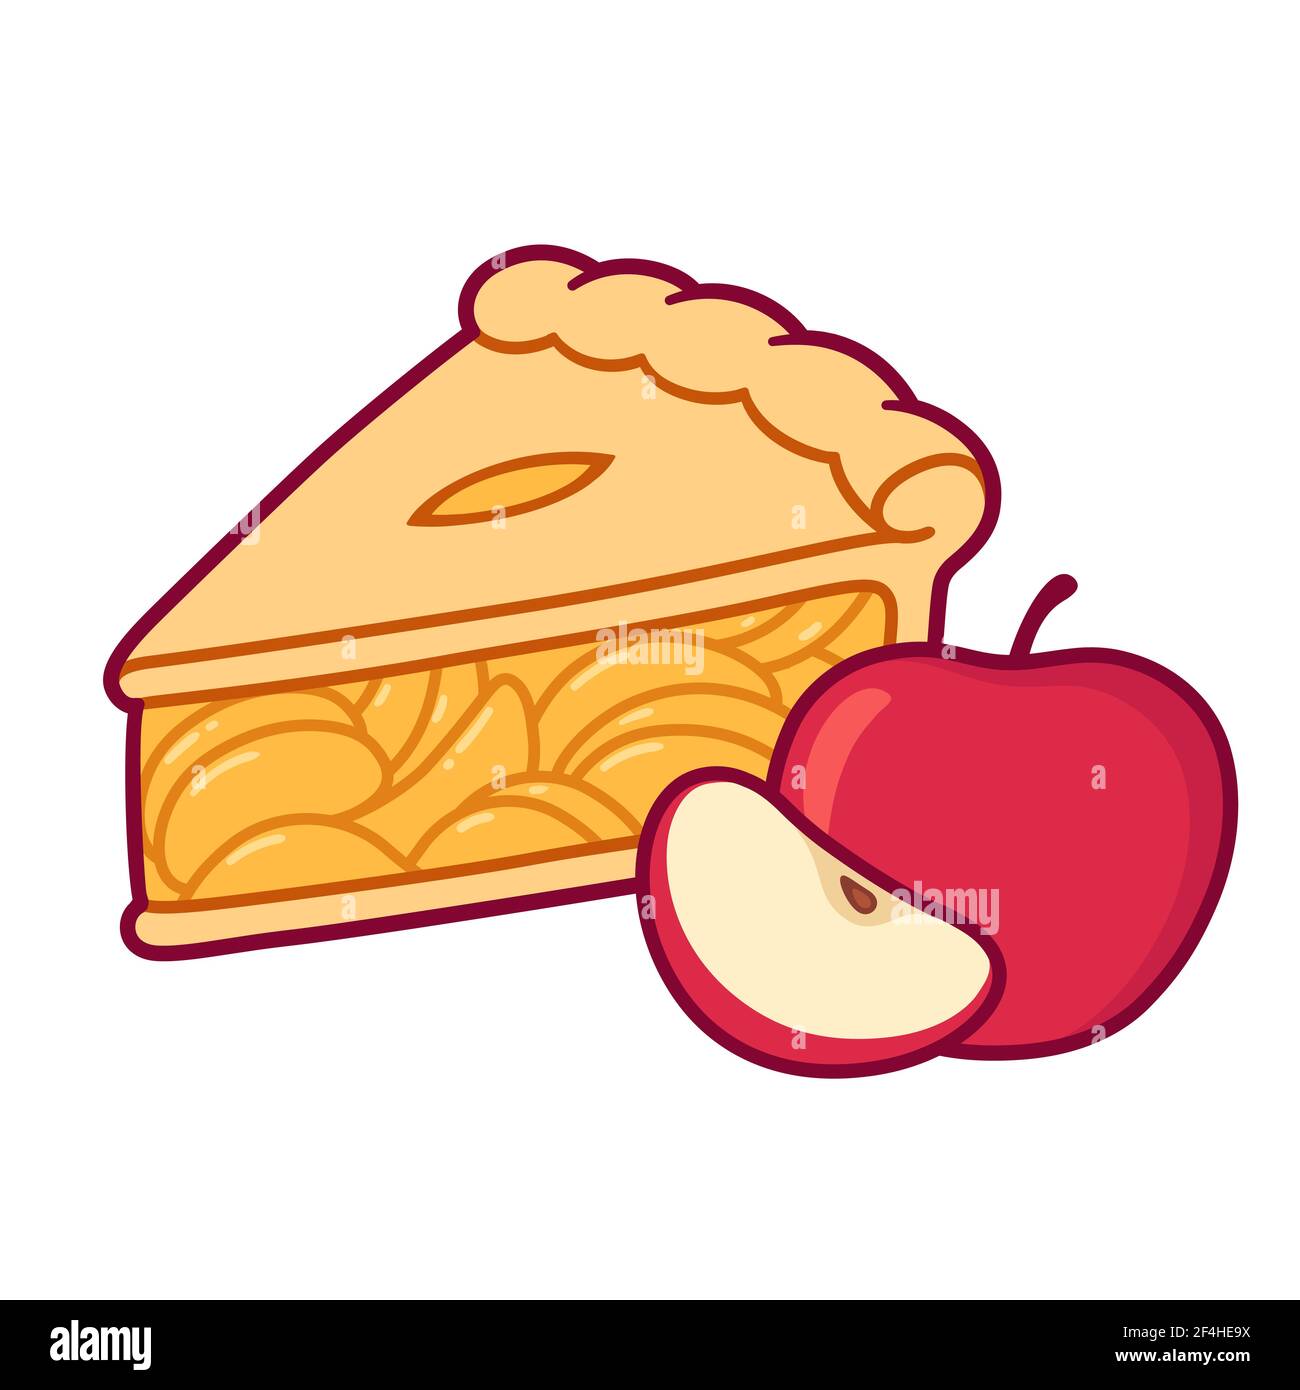 Cute cartoon apple pie drawing. Simple hand drawn pie slice with red apples. Isolated vector clip art illustration. Stock Vector